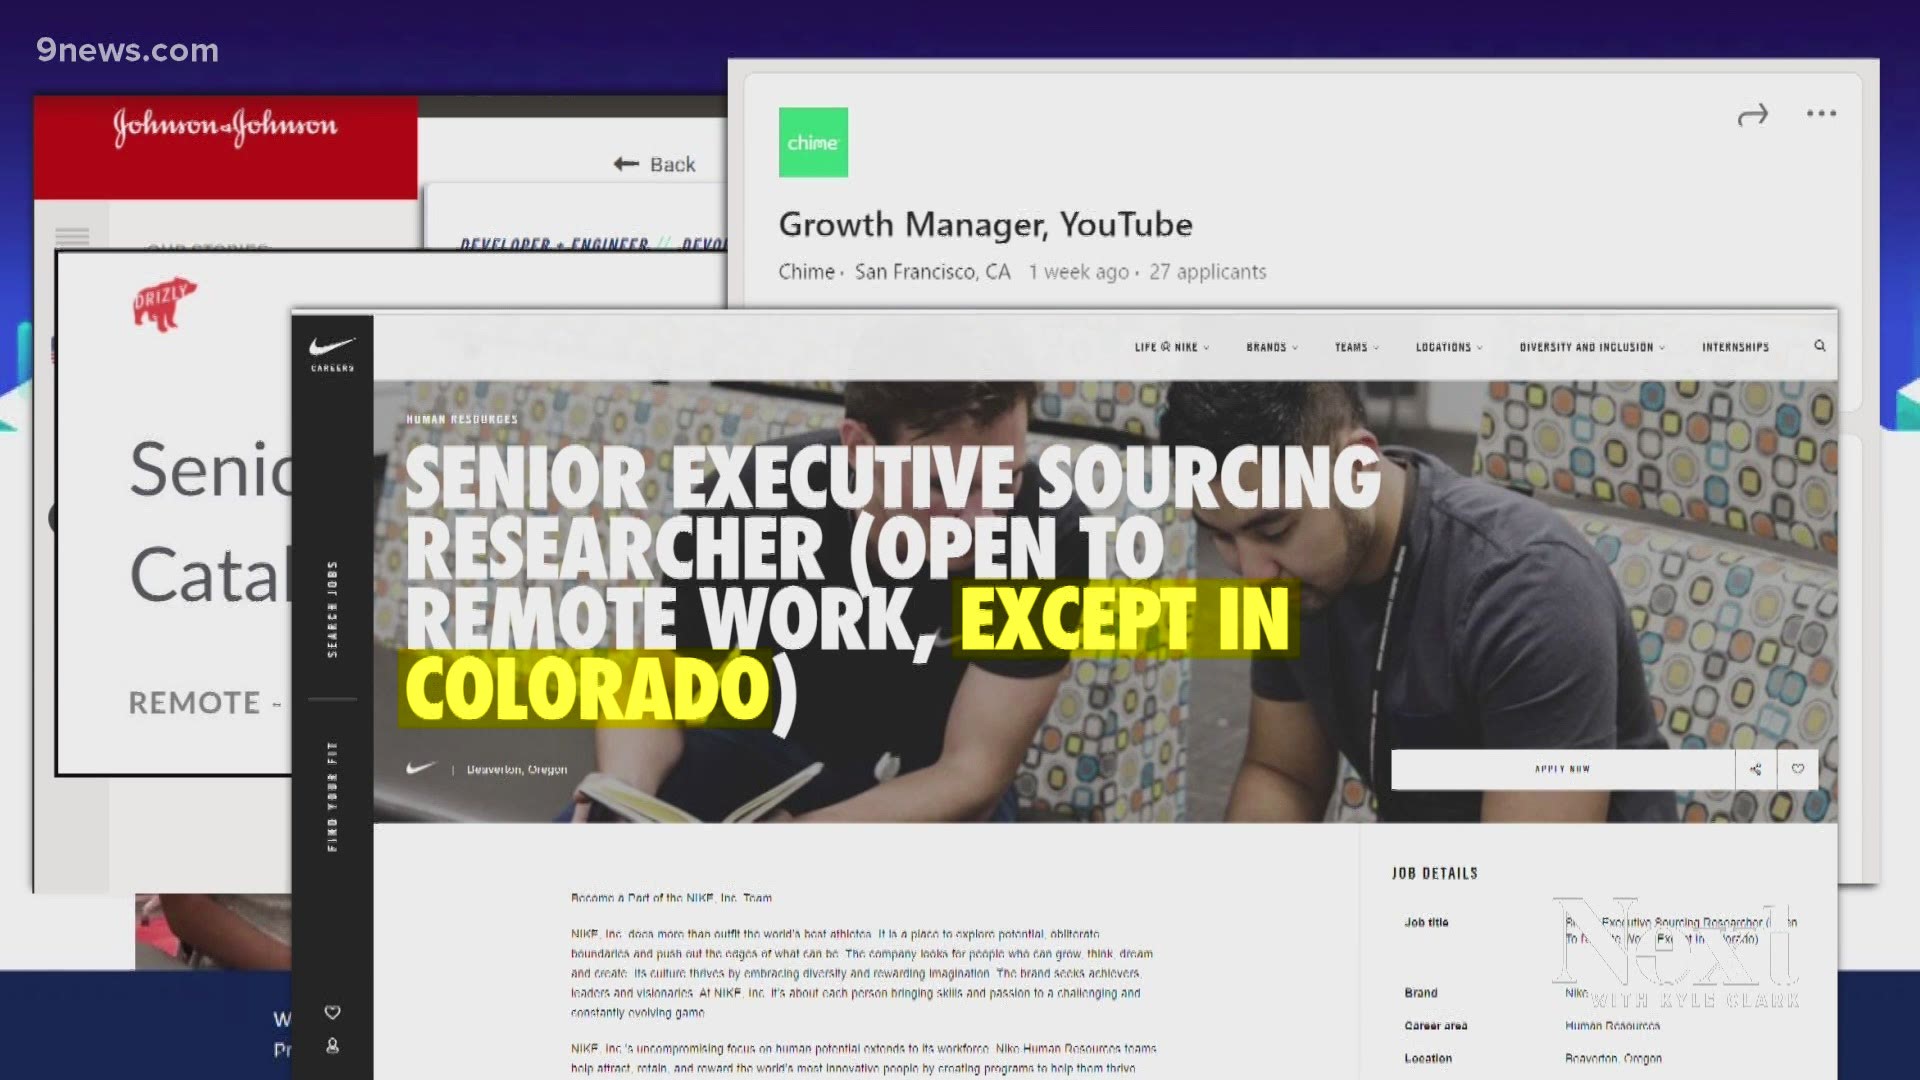 A 9Wants to Know investigation found some companies are posting jobs for anyone outside of Colorado to avoid posting salary ranges, a state law.